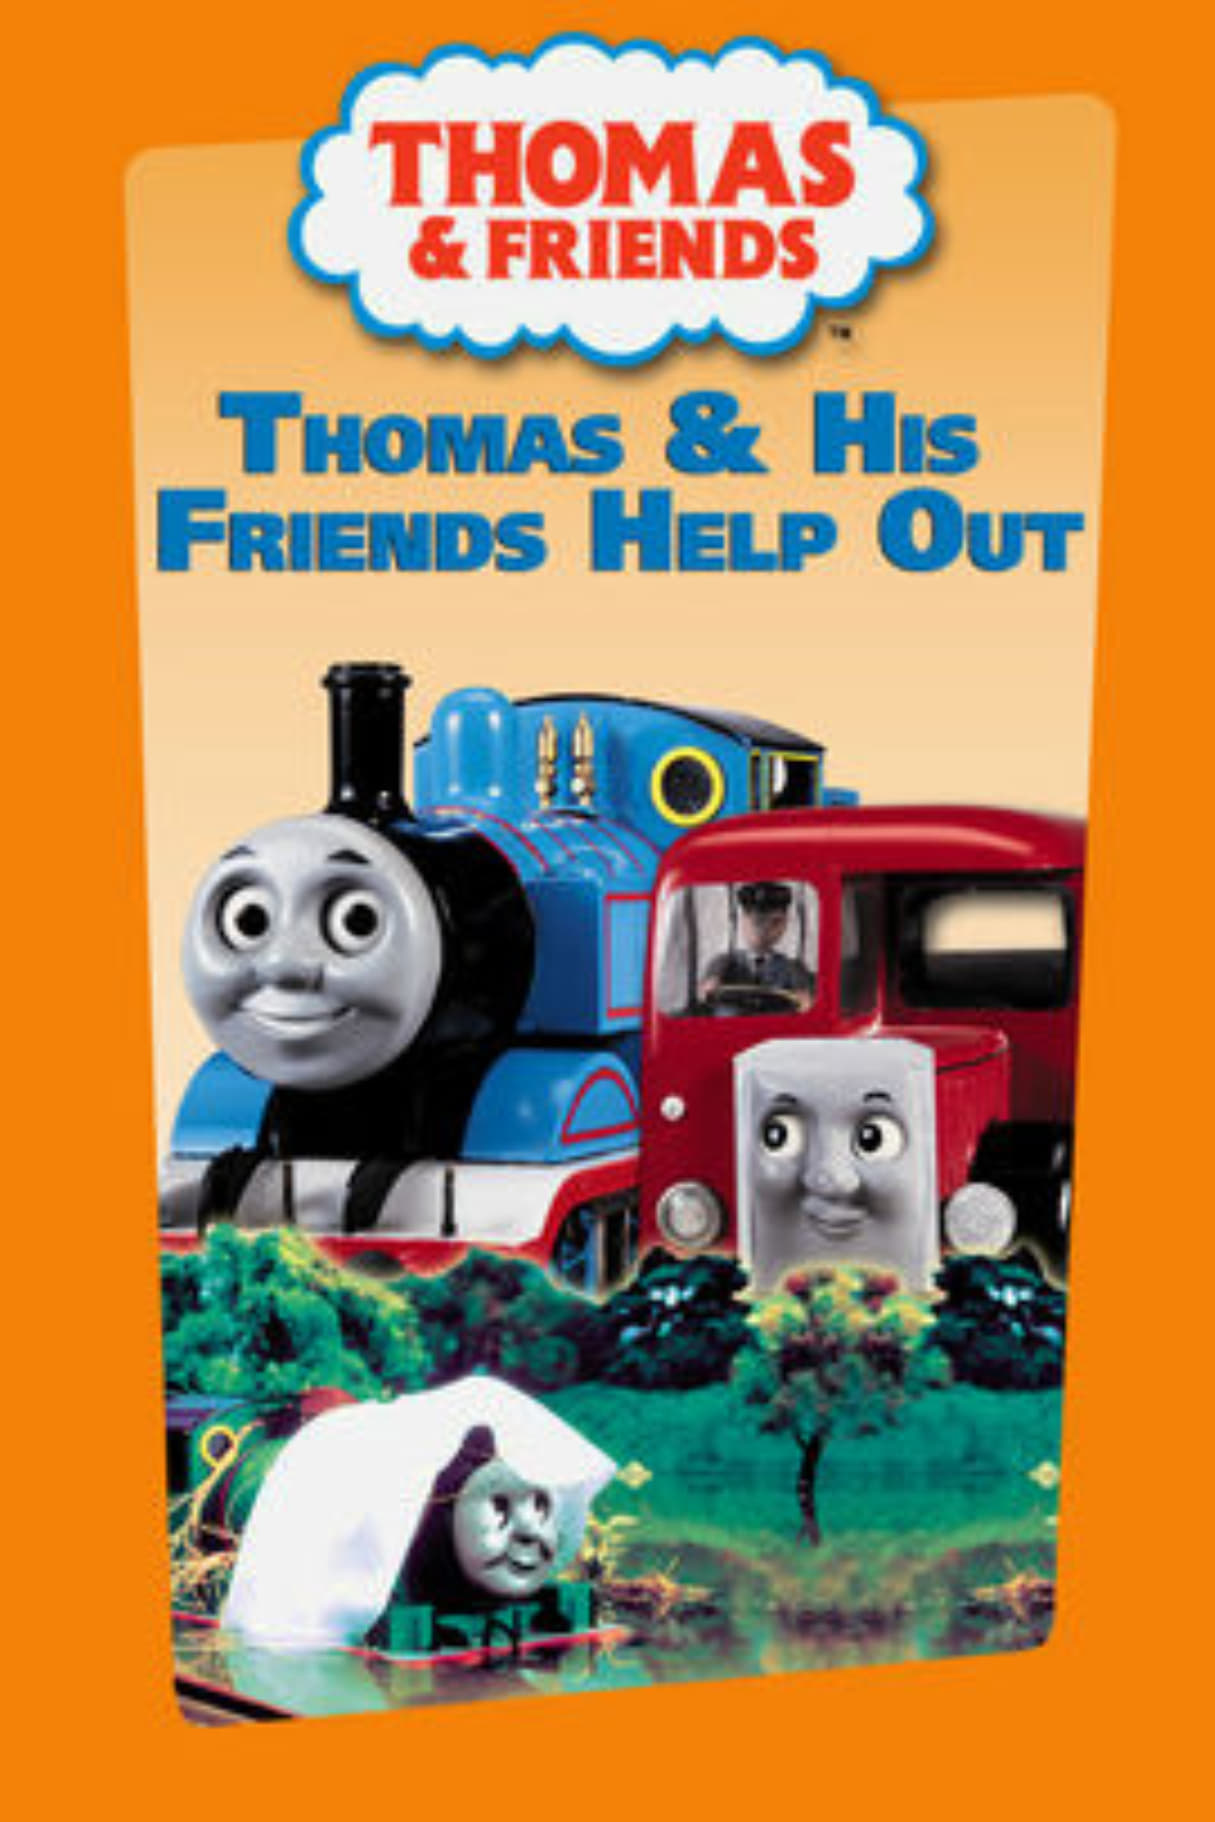 Thomas & Friends: Thomas & His Friends Help Out (2003)